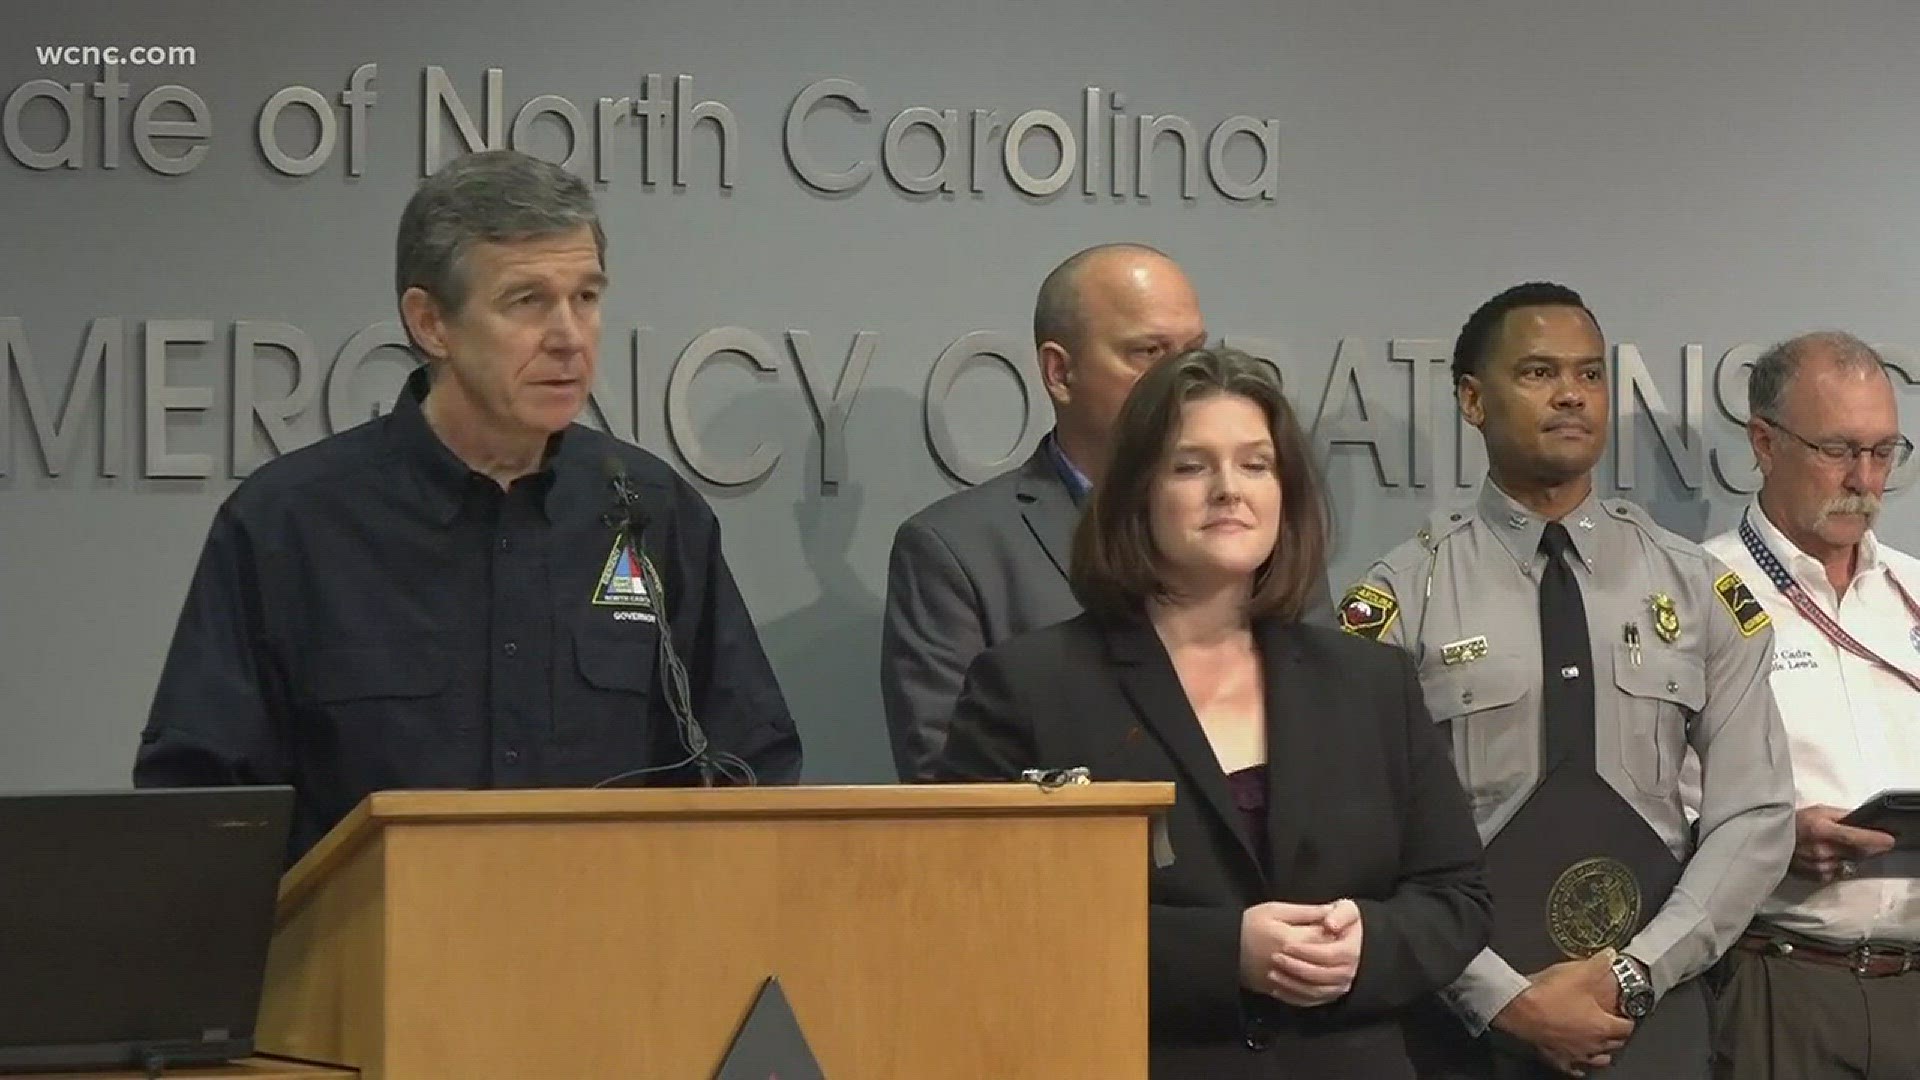 Governor Roy Cooper urged North Carolina residents to not go out into Hurricane Florence as the powerful storm is expected to bring catastrophic flooding and devastating storm surge to the Carolinas.